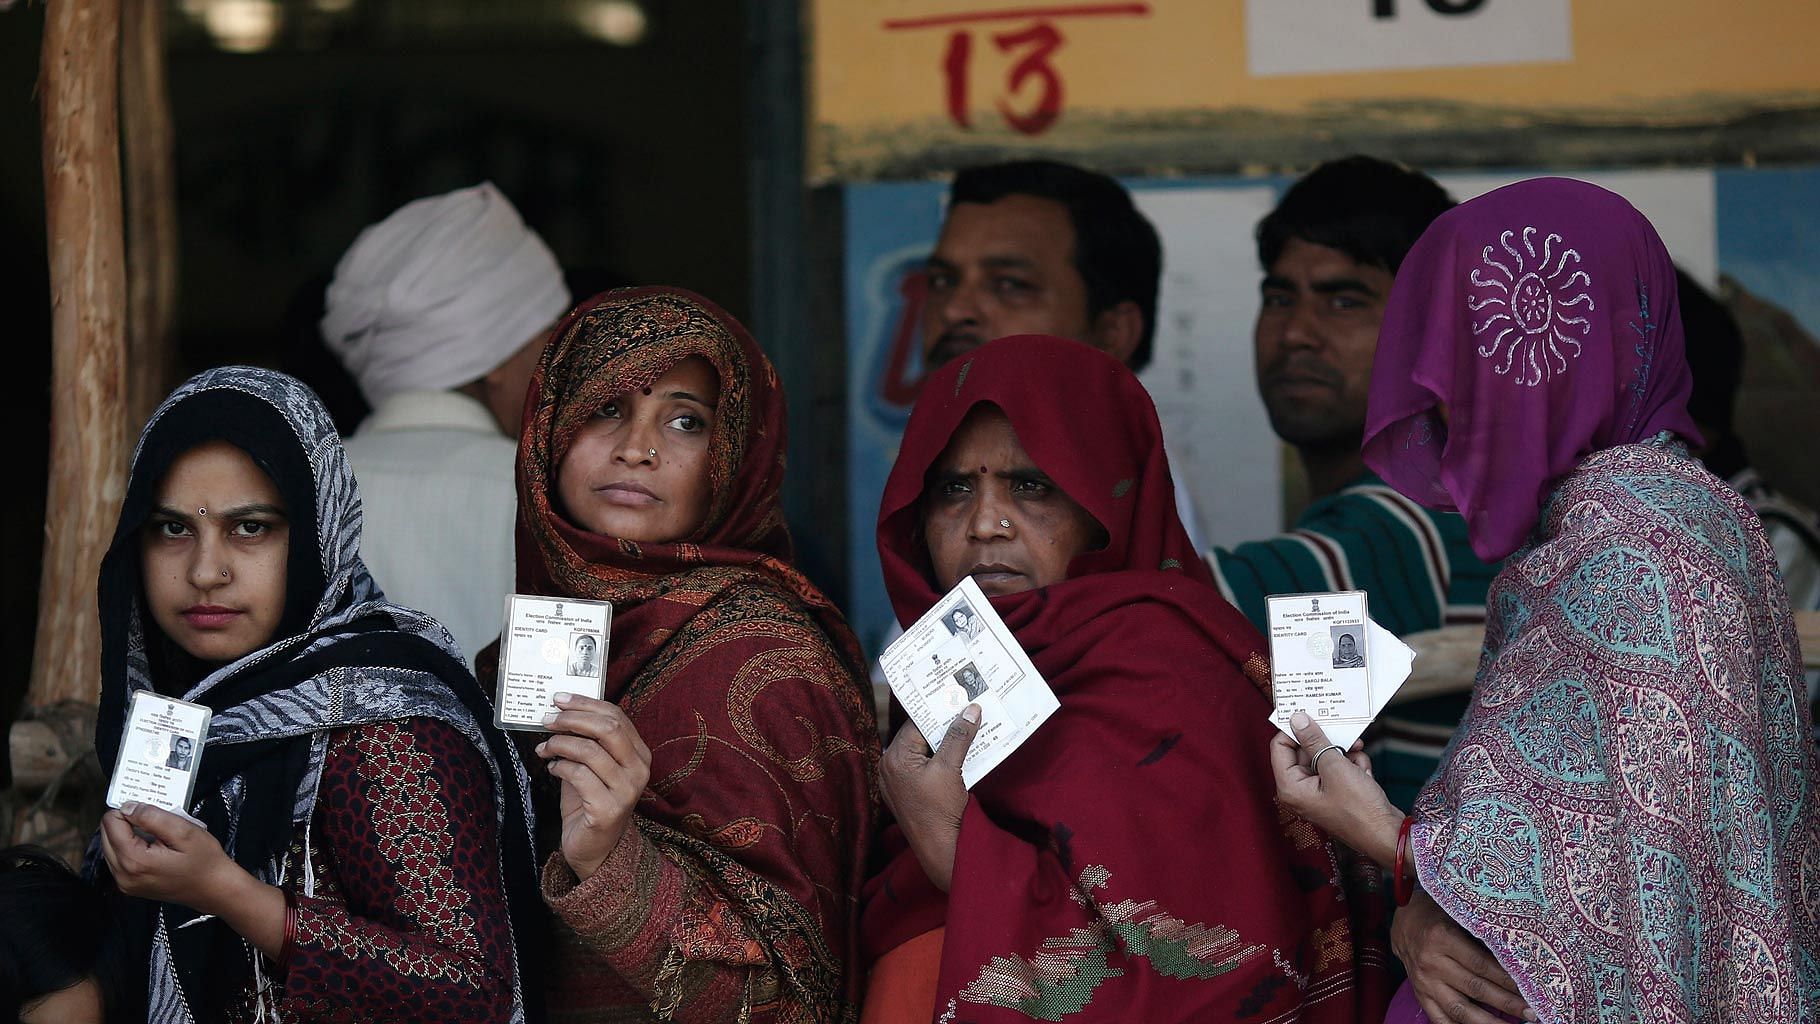 File photo of women showing their voter id cards before polling.